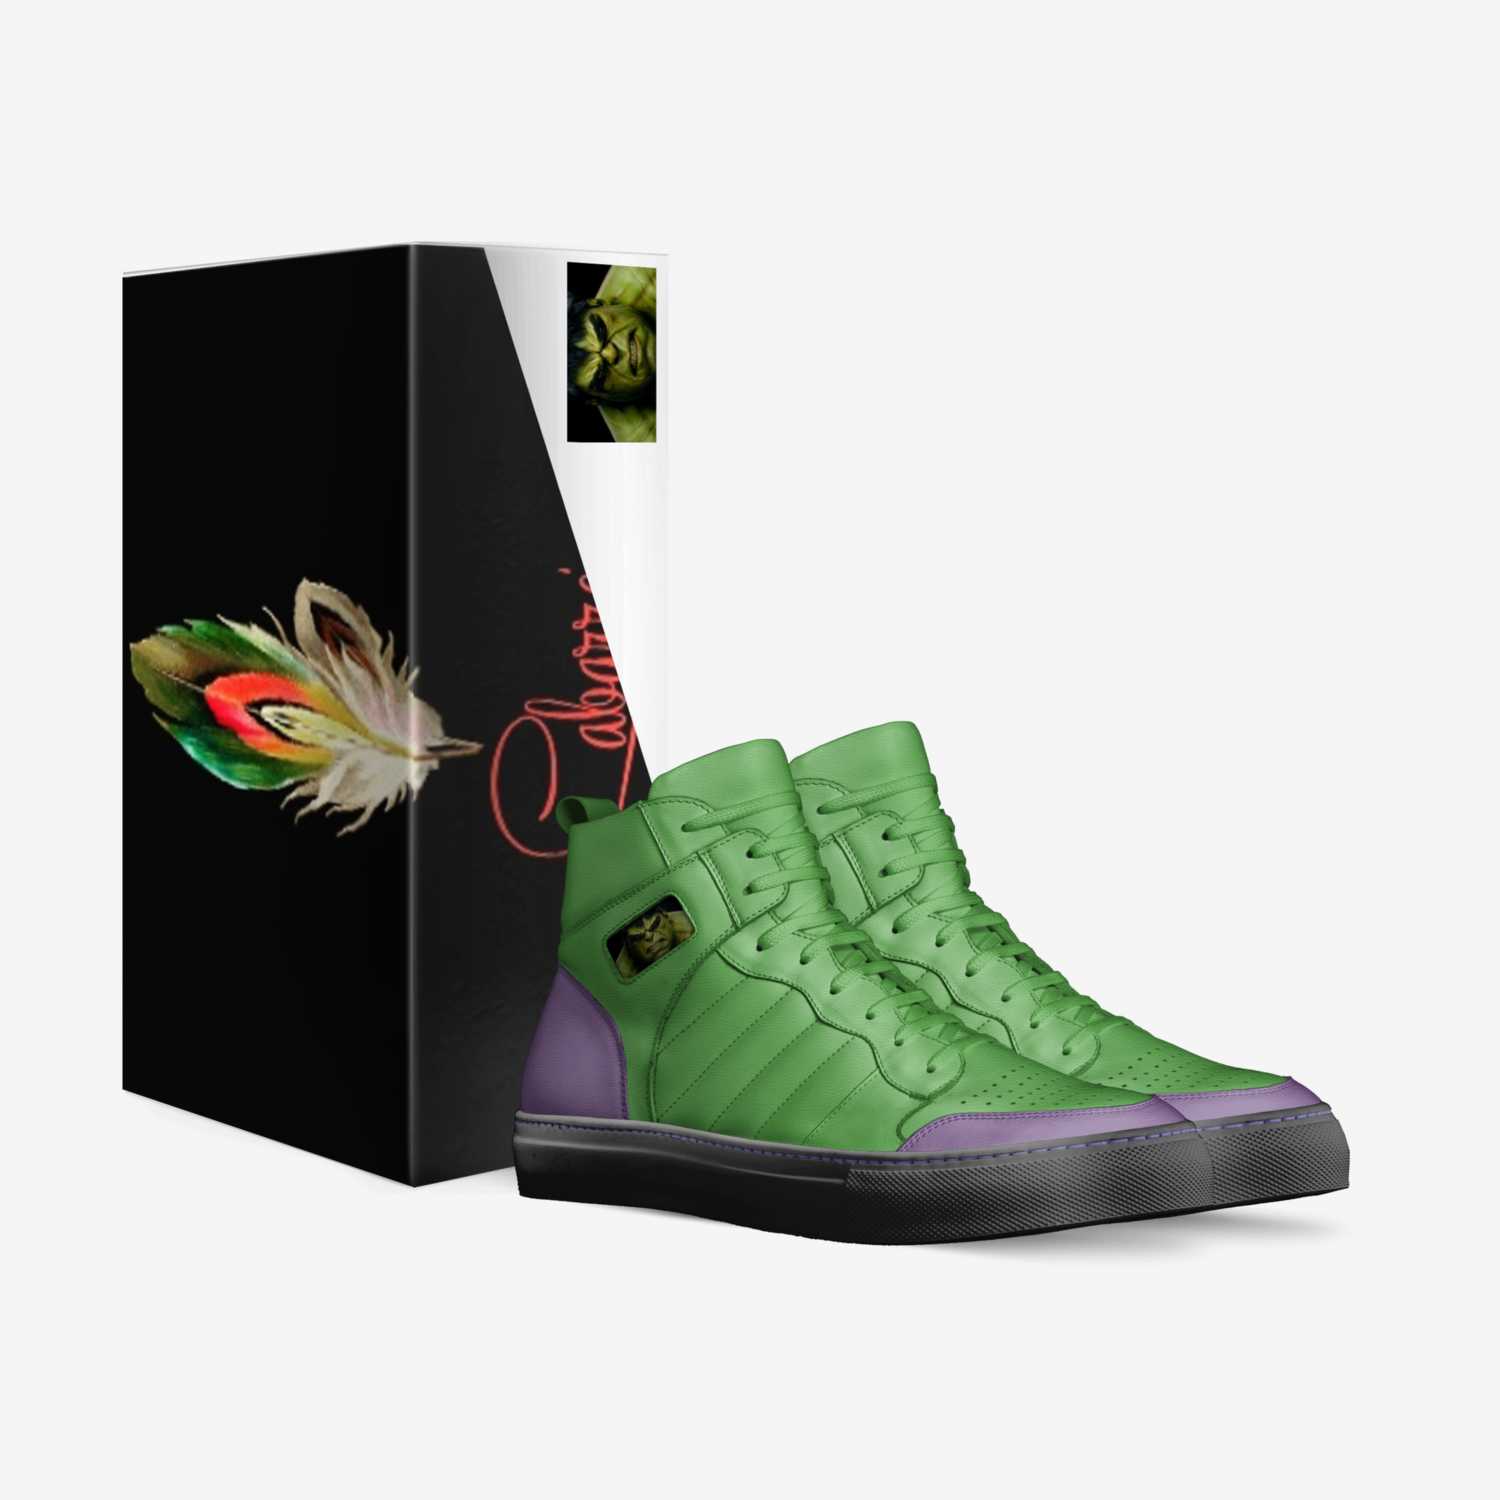 Labarre'  custom made in Italy shoes by Jerome Riddick | Box view